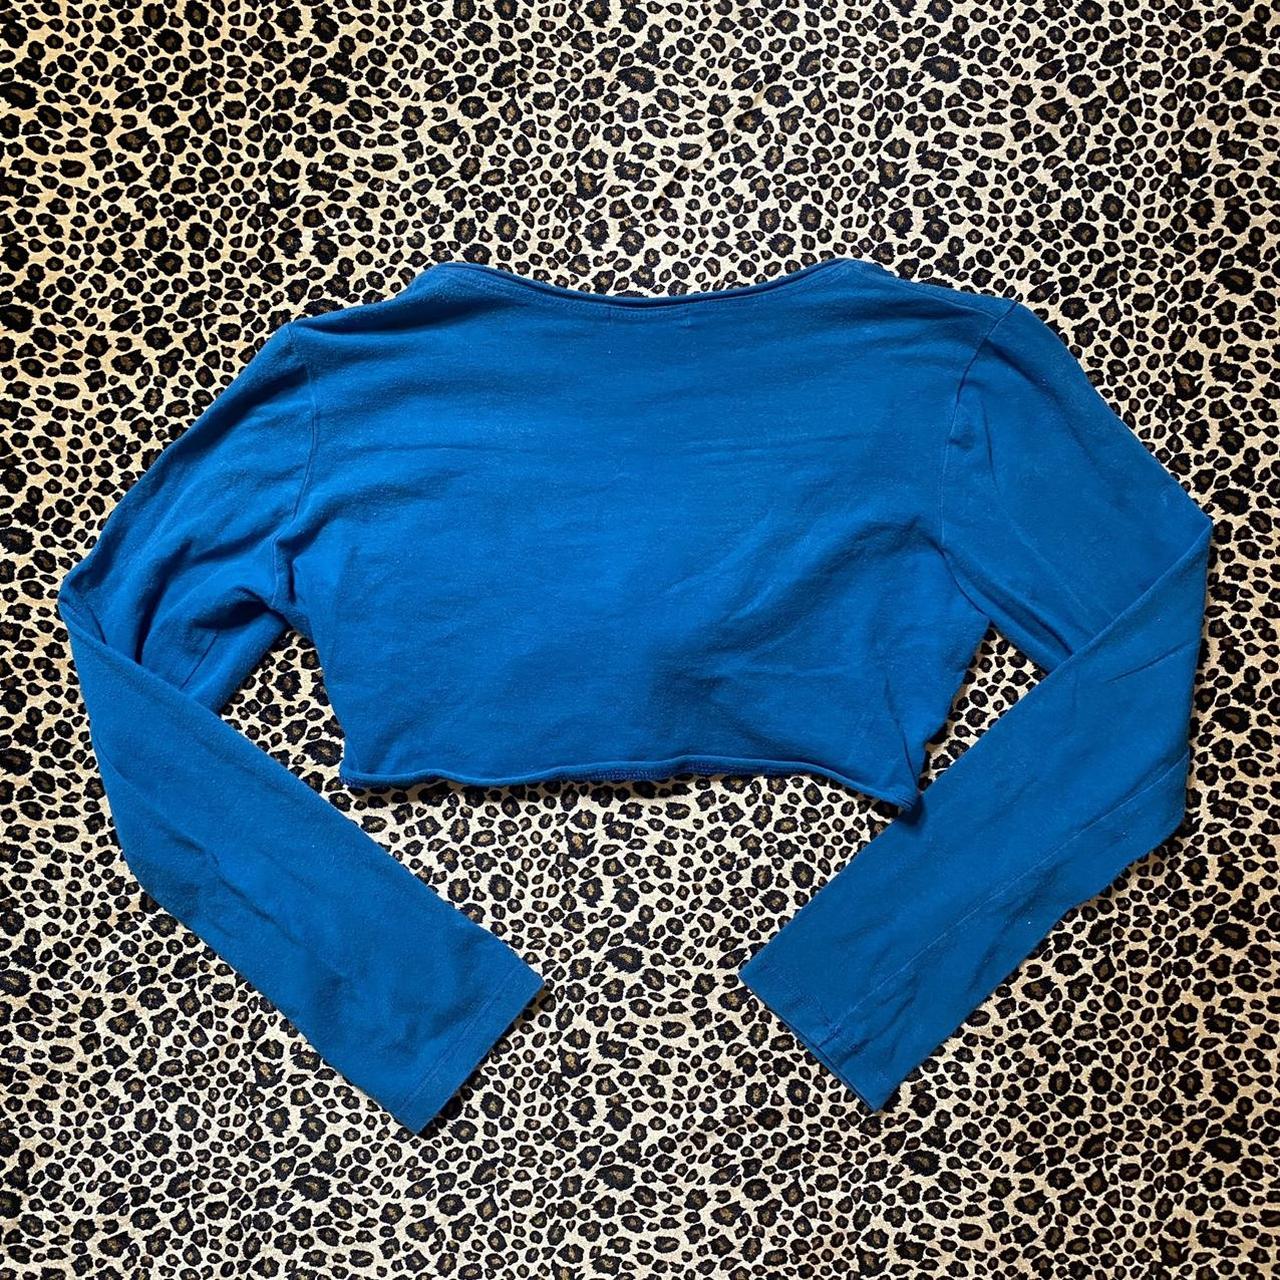 Product Image 2 - ♥︎ ocean blue 2000s cropped